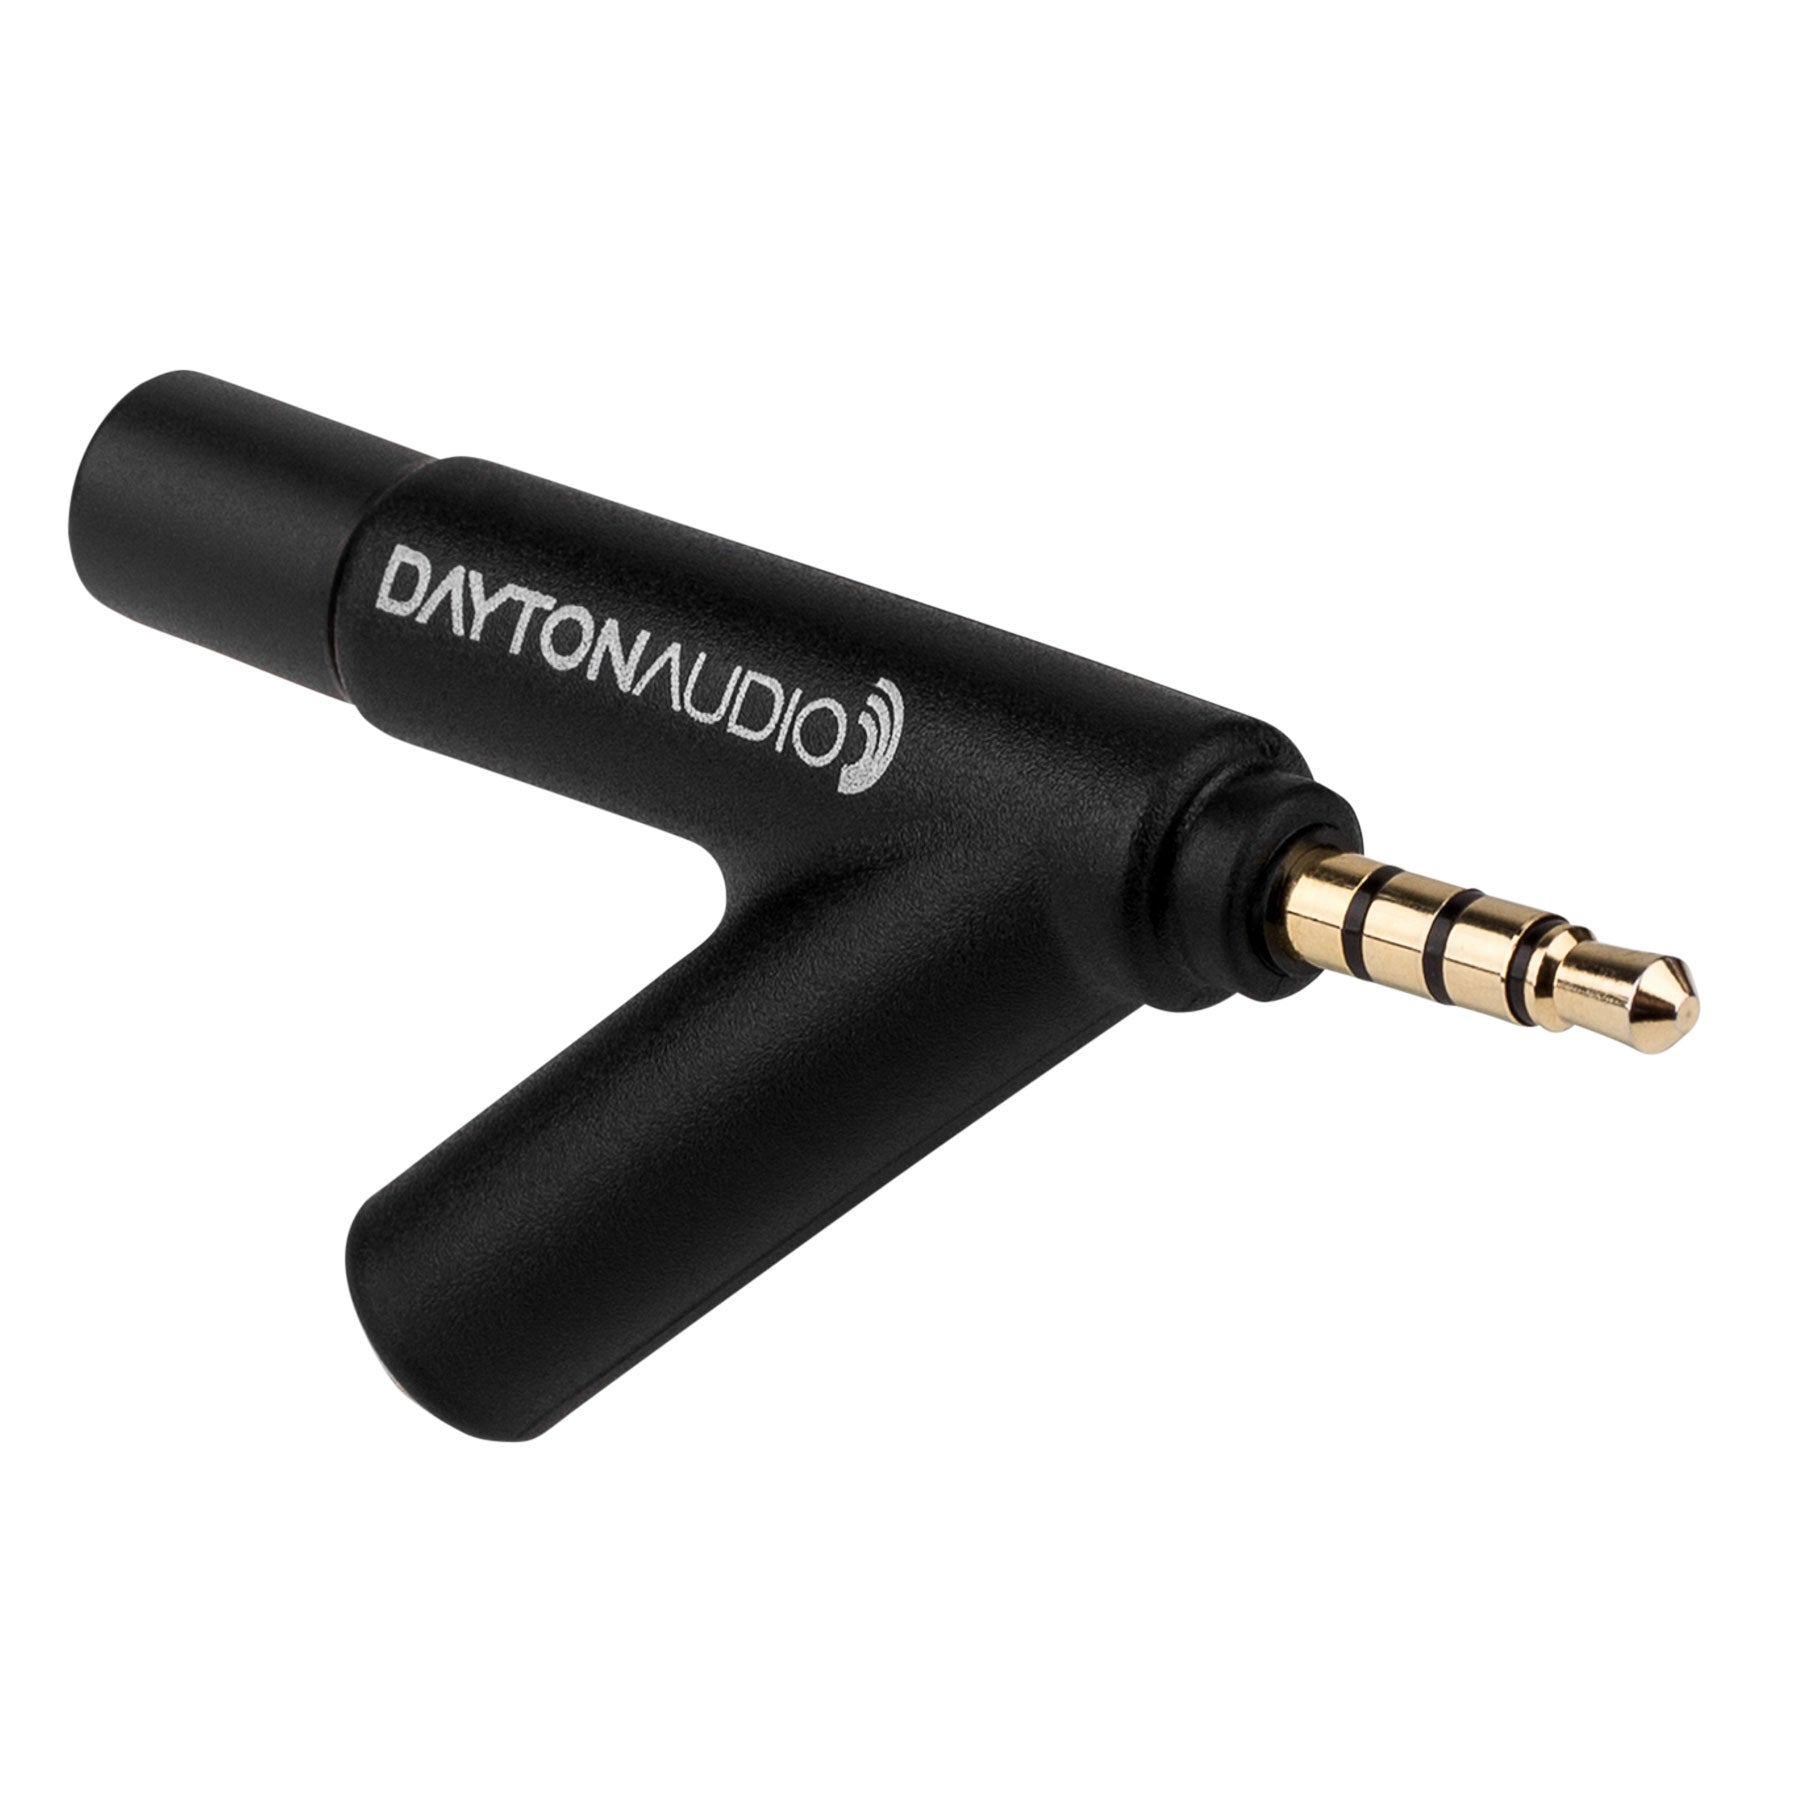 [Open Box] Dayton Audio iMM-6 Calibrated Measurement Microphone for iPhone, iPad Tablet and Android